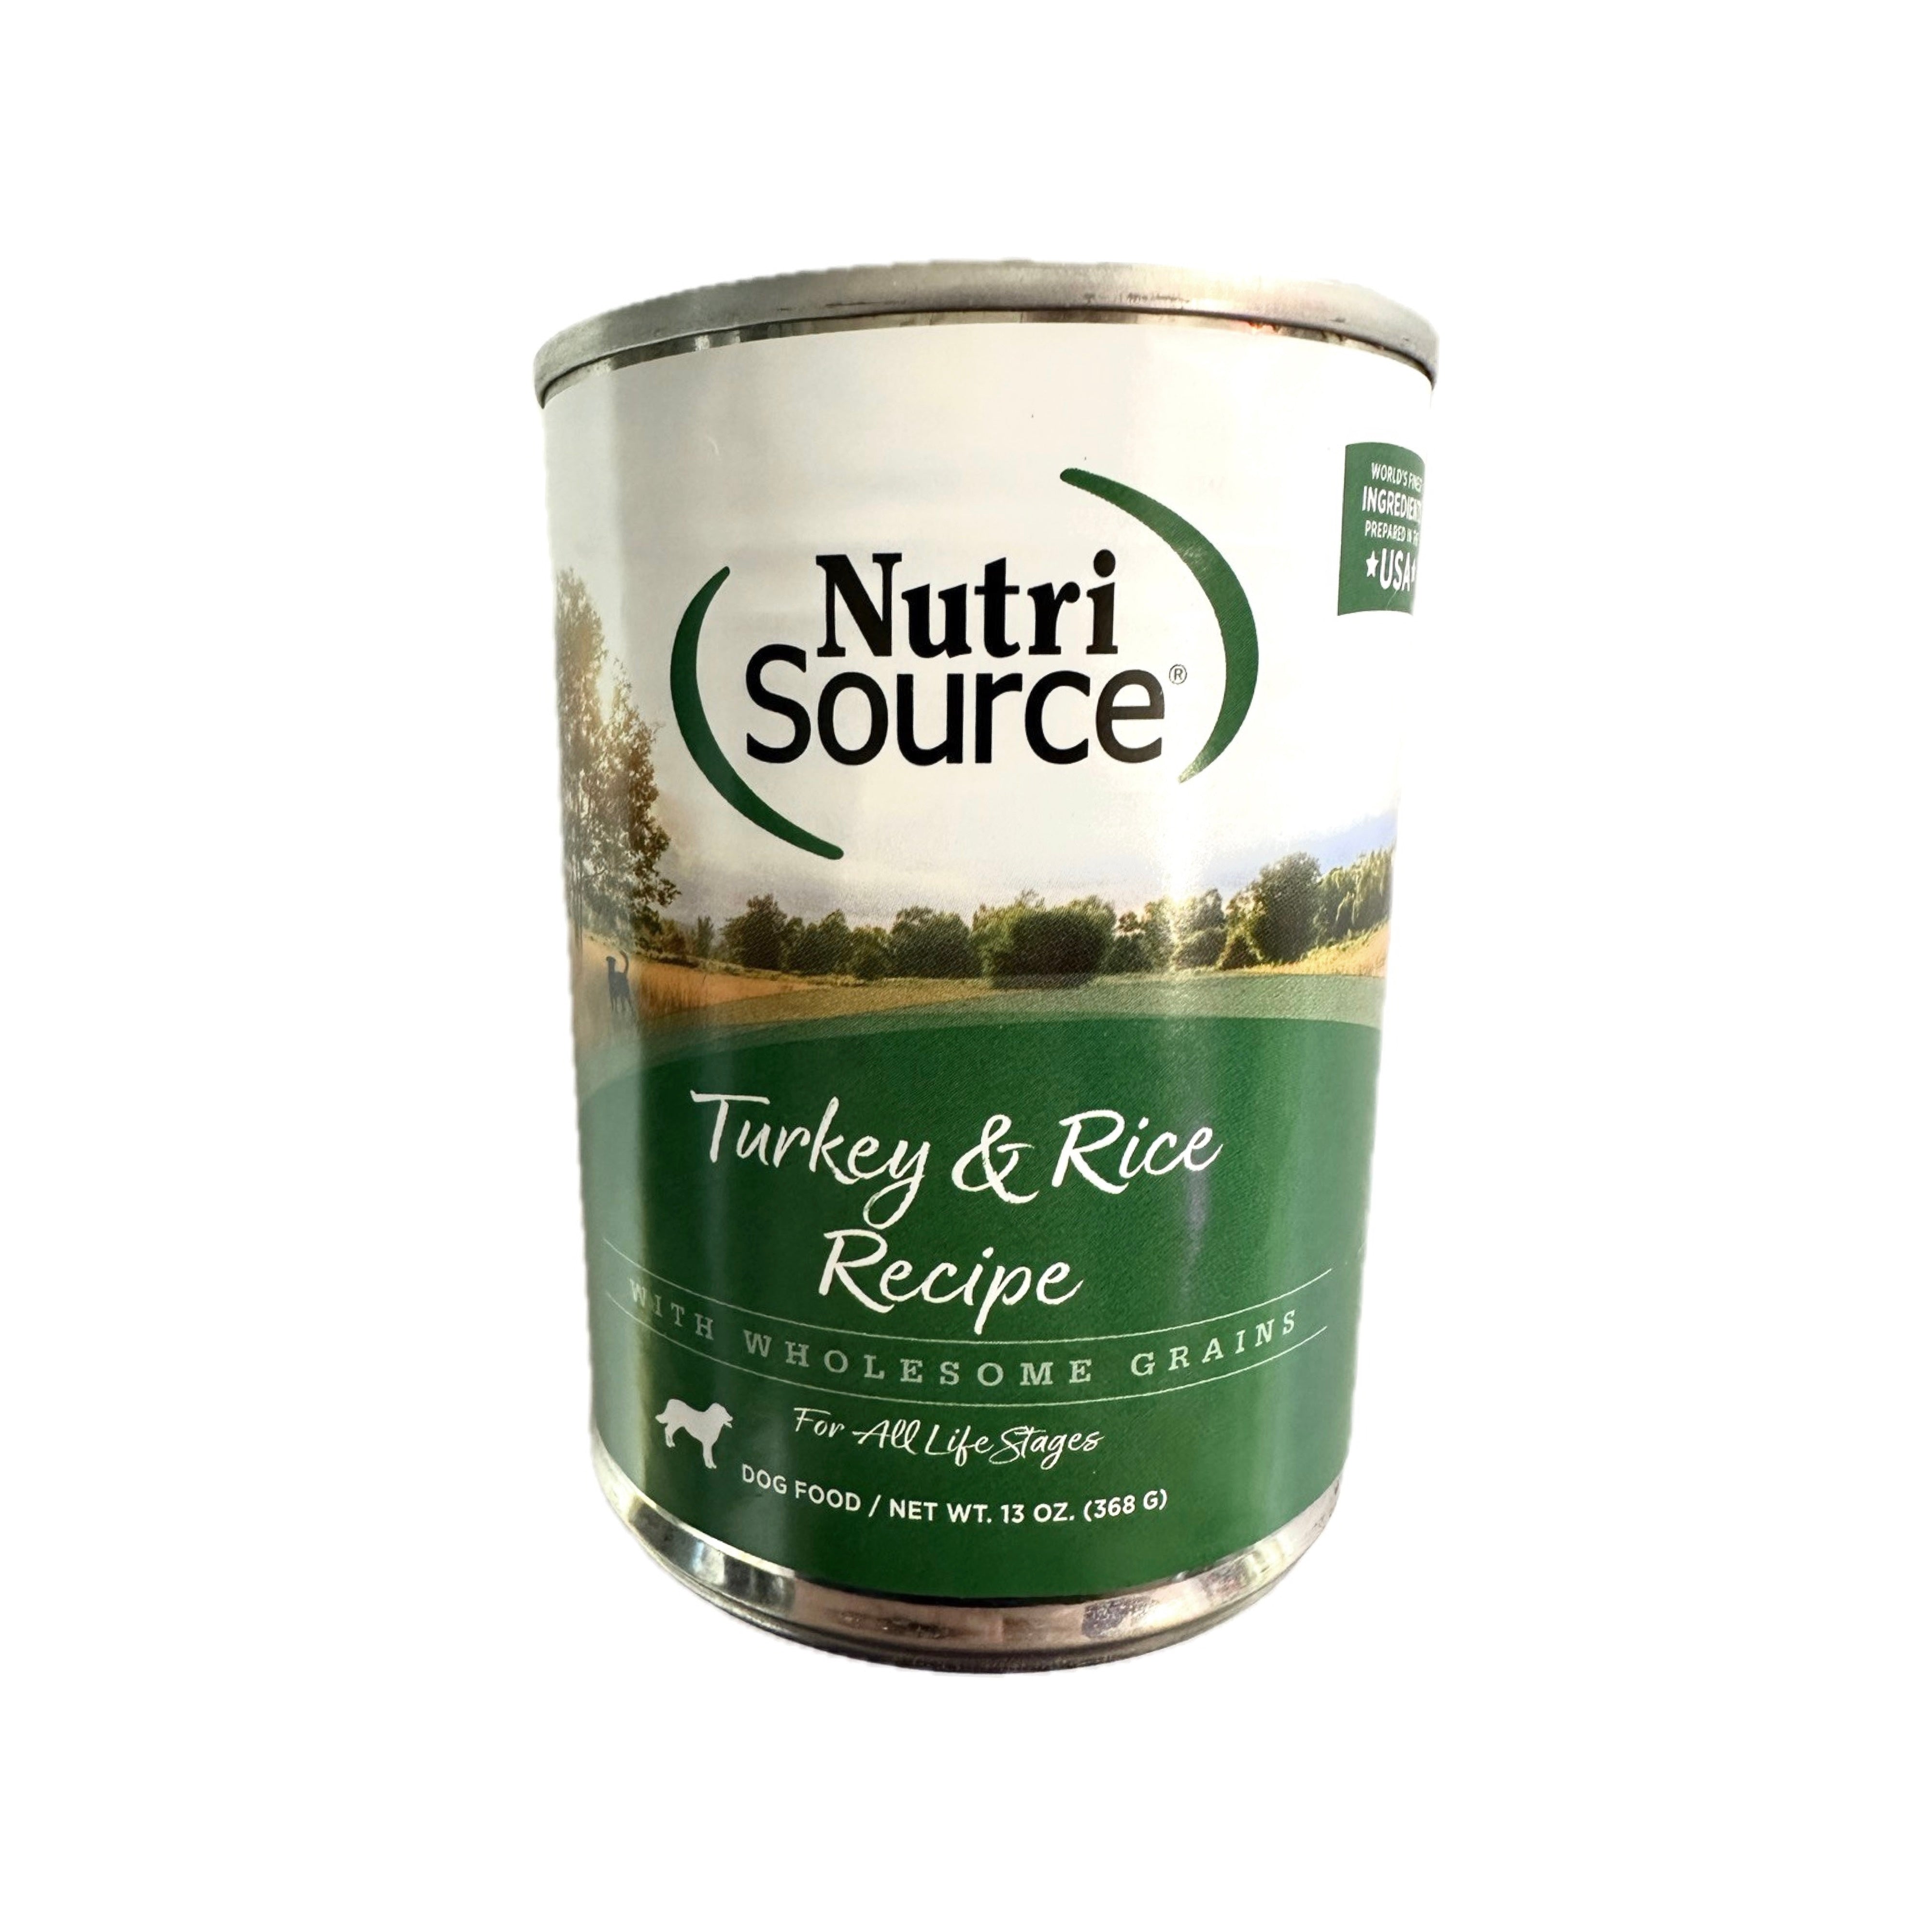 NutriSource Turkey & Rice Recipe with Wholesome Grains Canned Dog Food